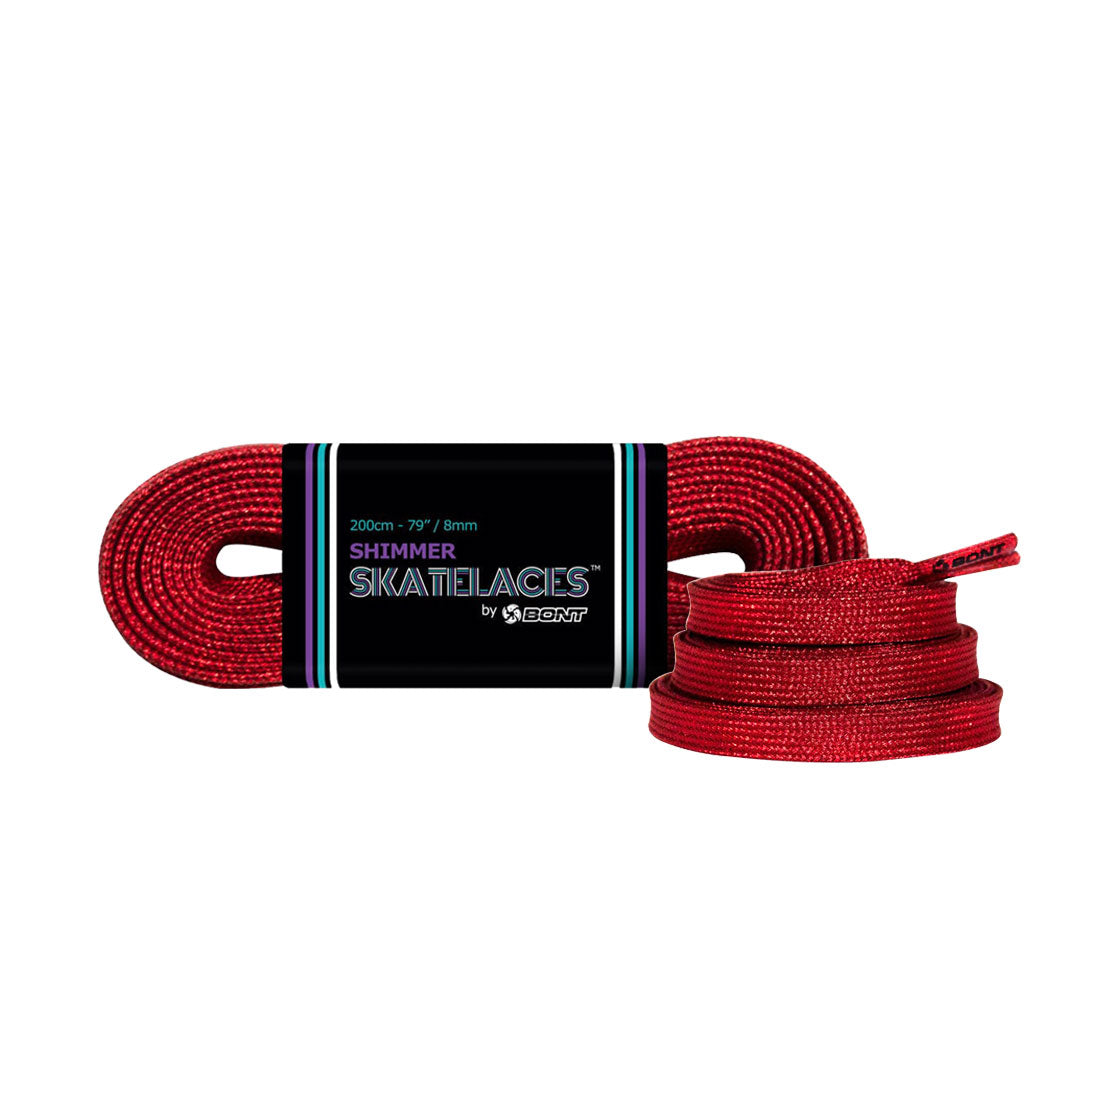 Bont Shimmer 8mm Laces - 200cm/79in Very Cherry Red Laces